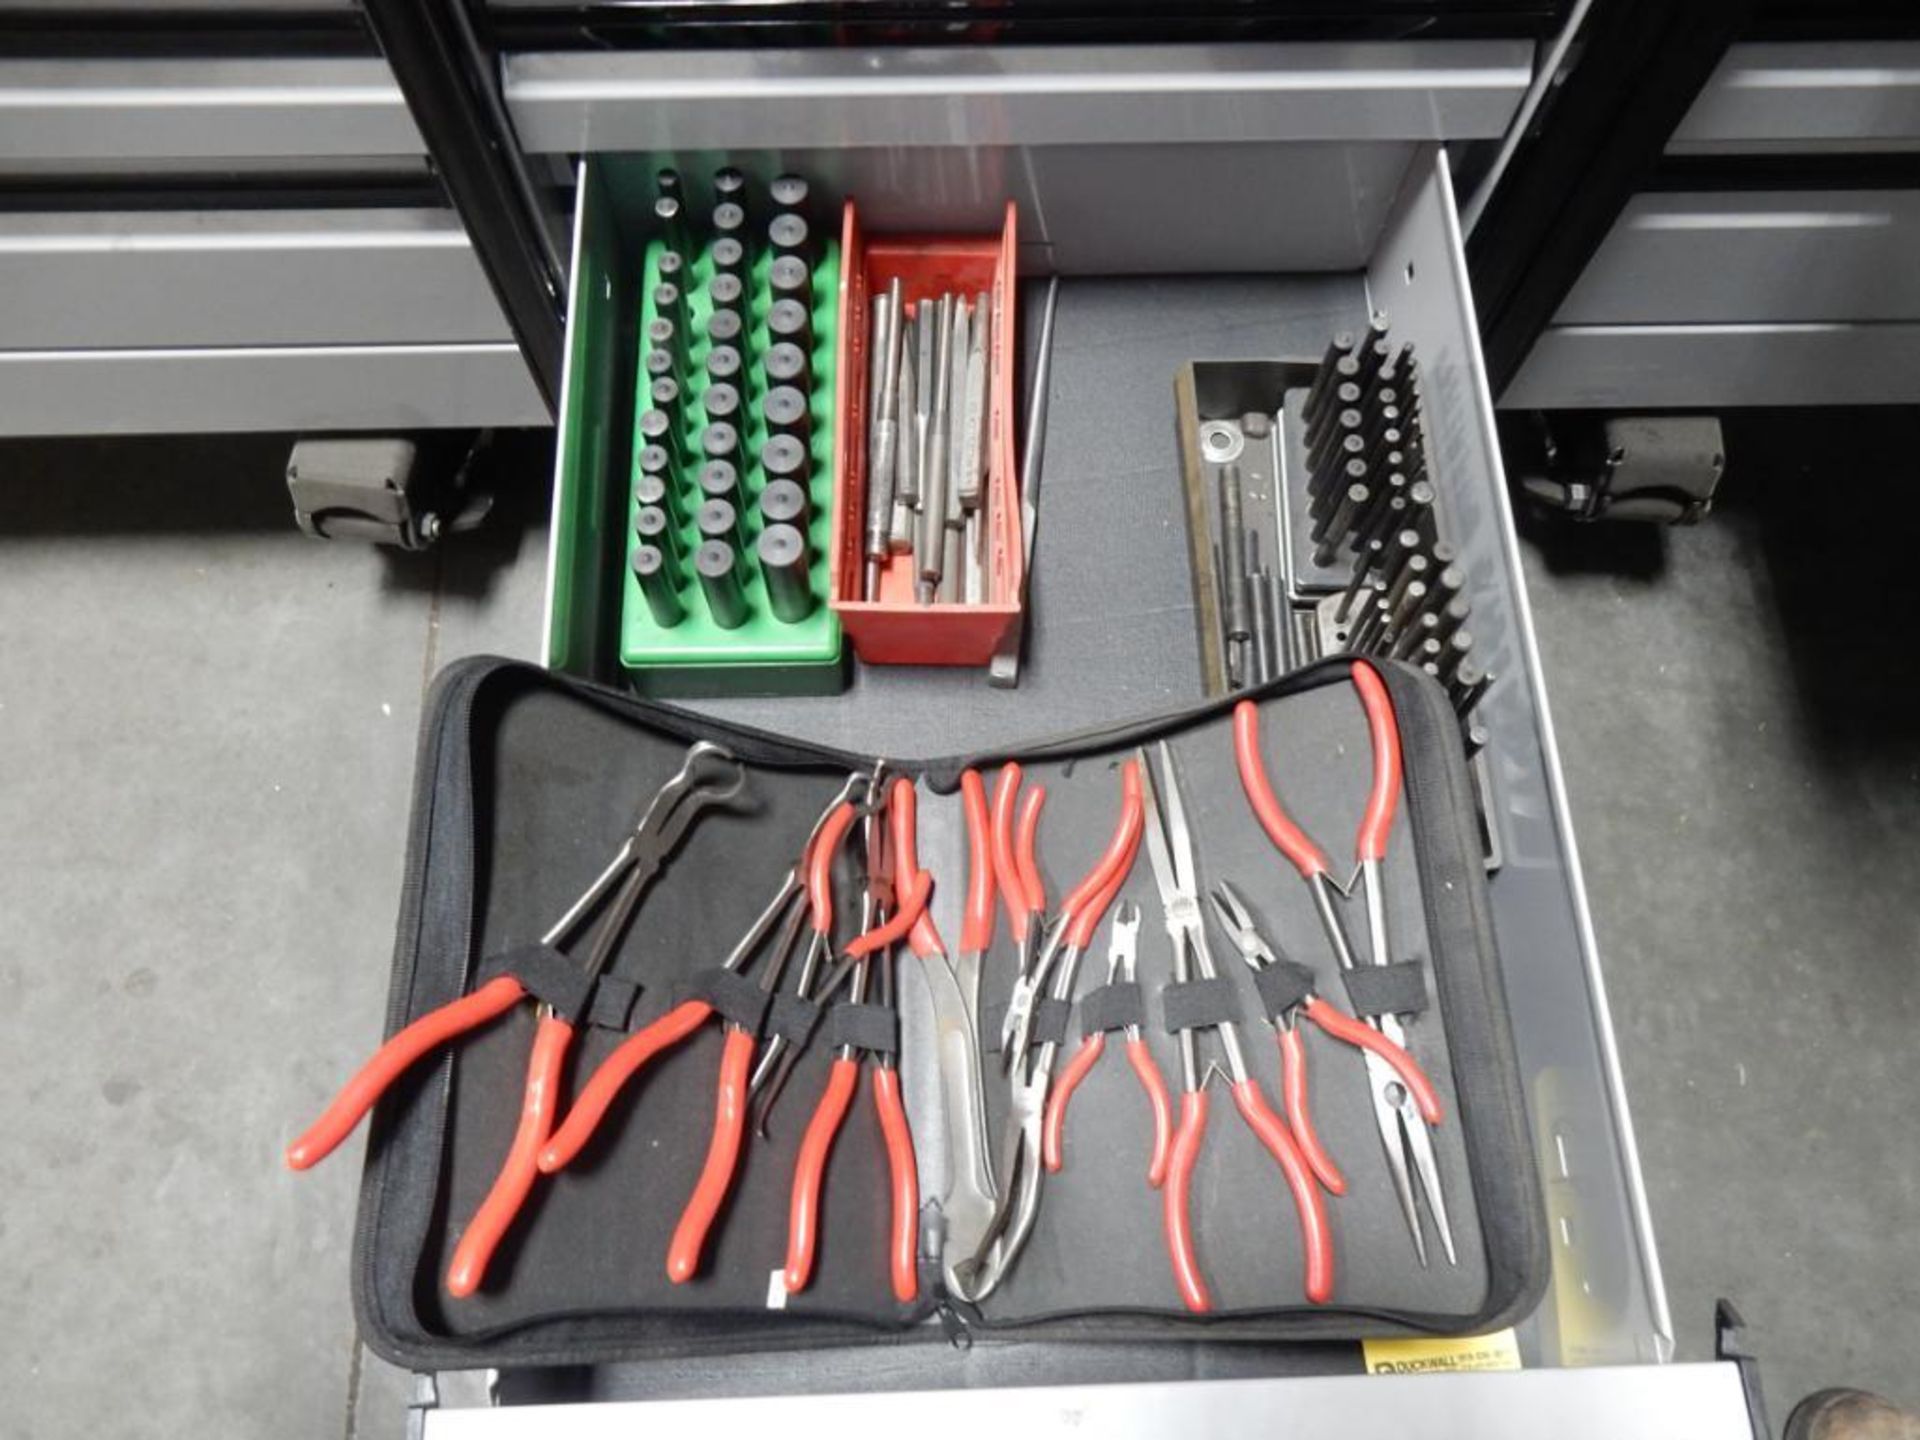 CONTENTS OF DRAWER - TRANSFER PUNCHES, CENTER PUNCHES & MAC PLYER SET